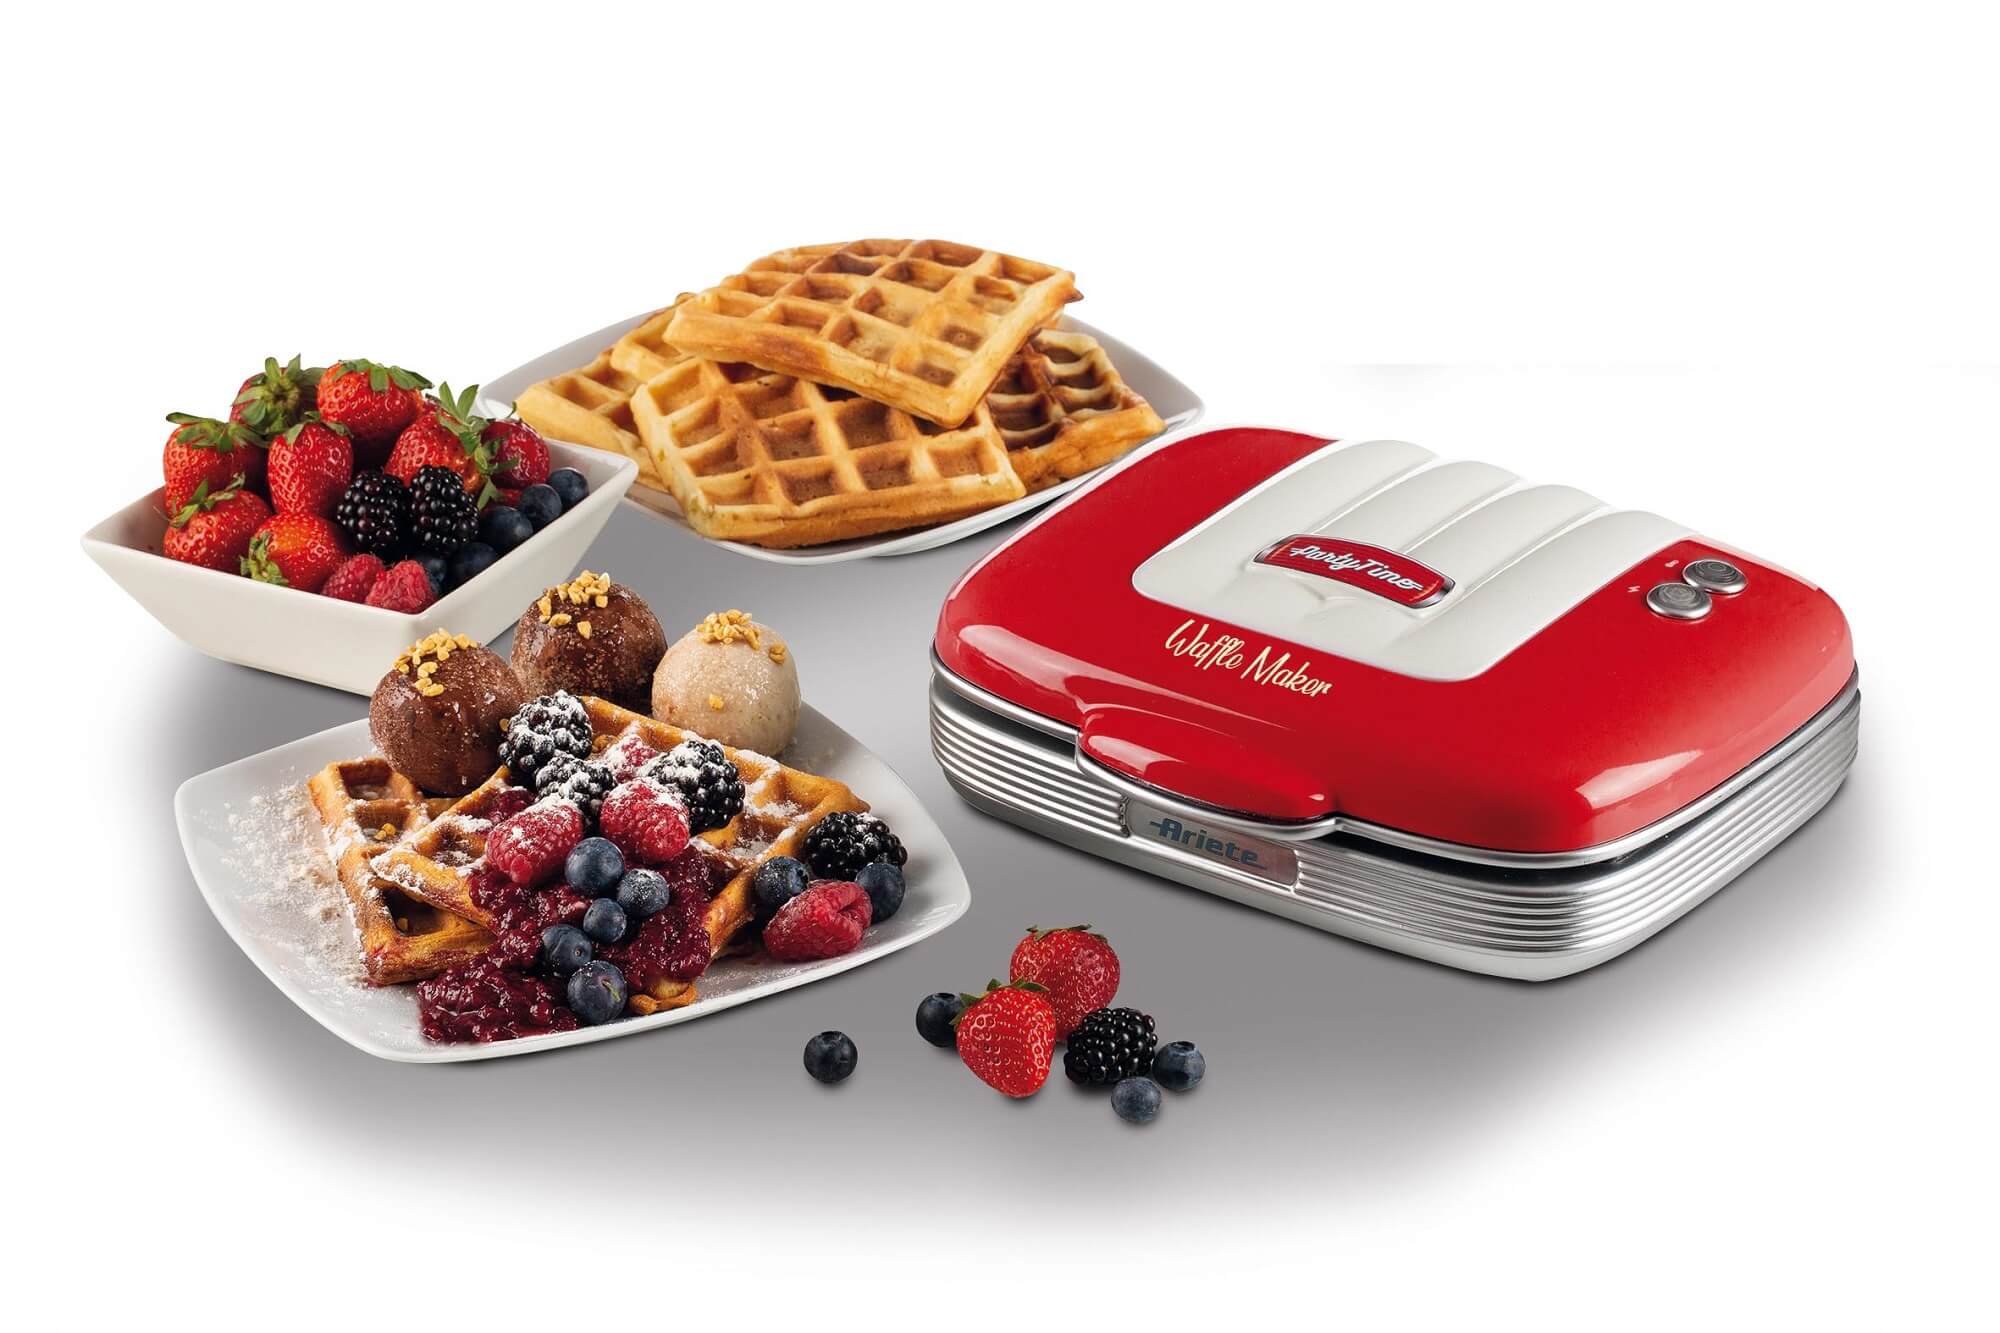 Piastra elettrica per waffle, Waffle Maker Party Time, Ariete 1973 Rosso